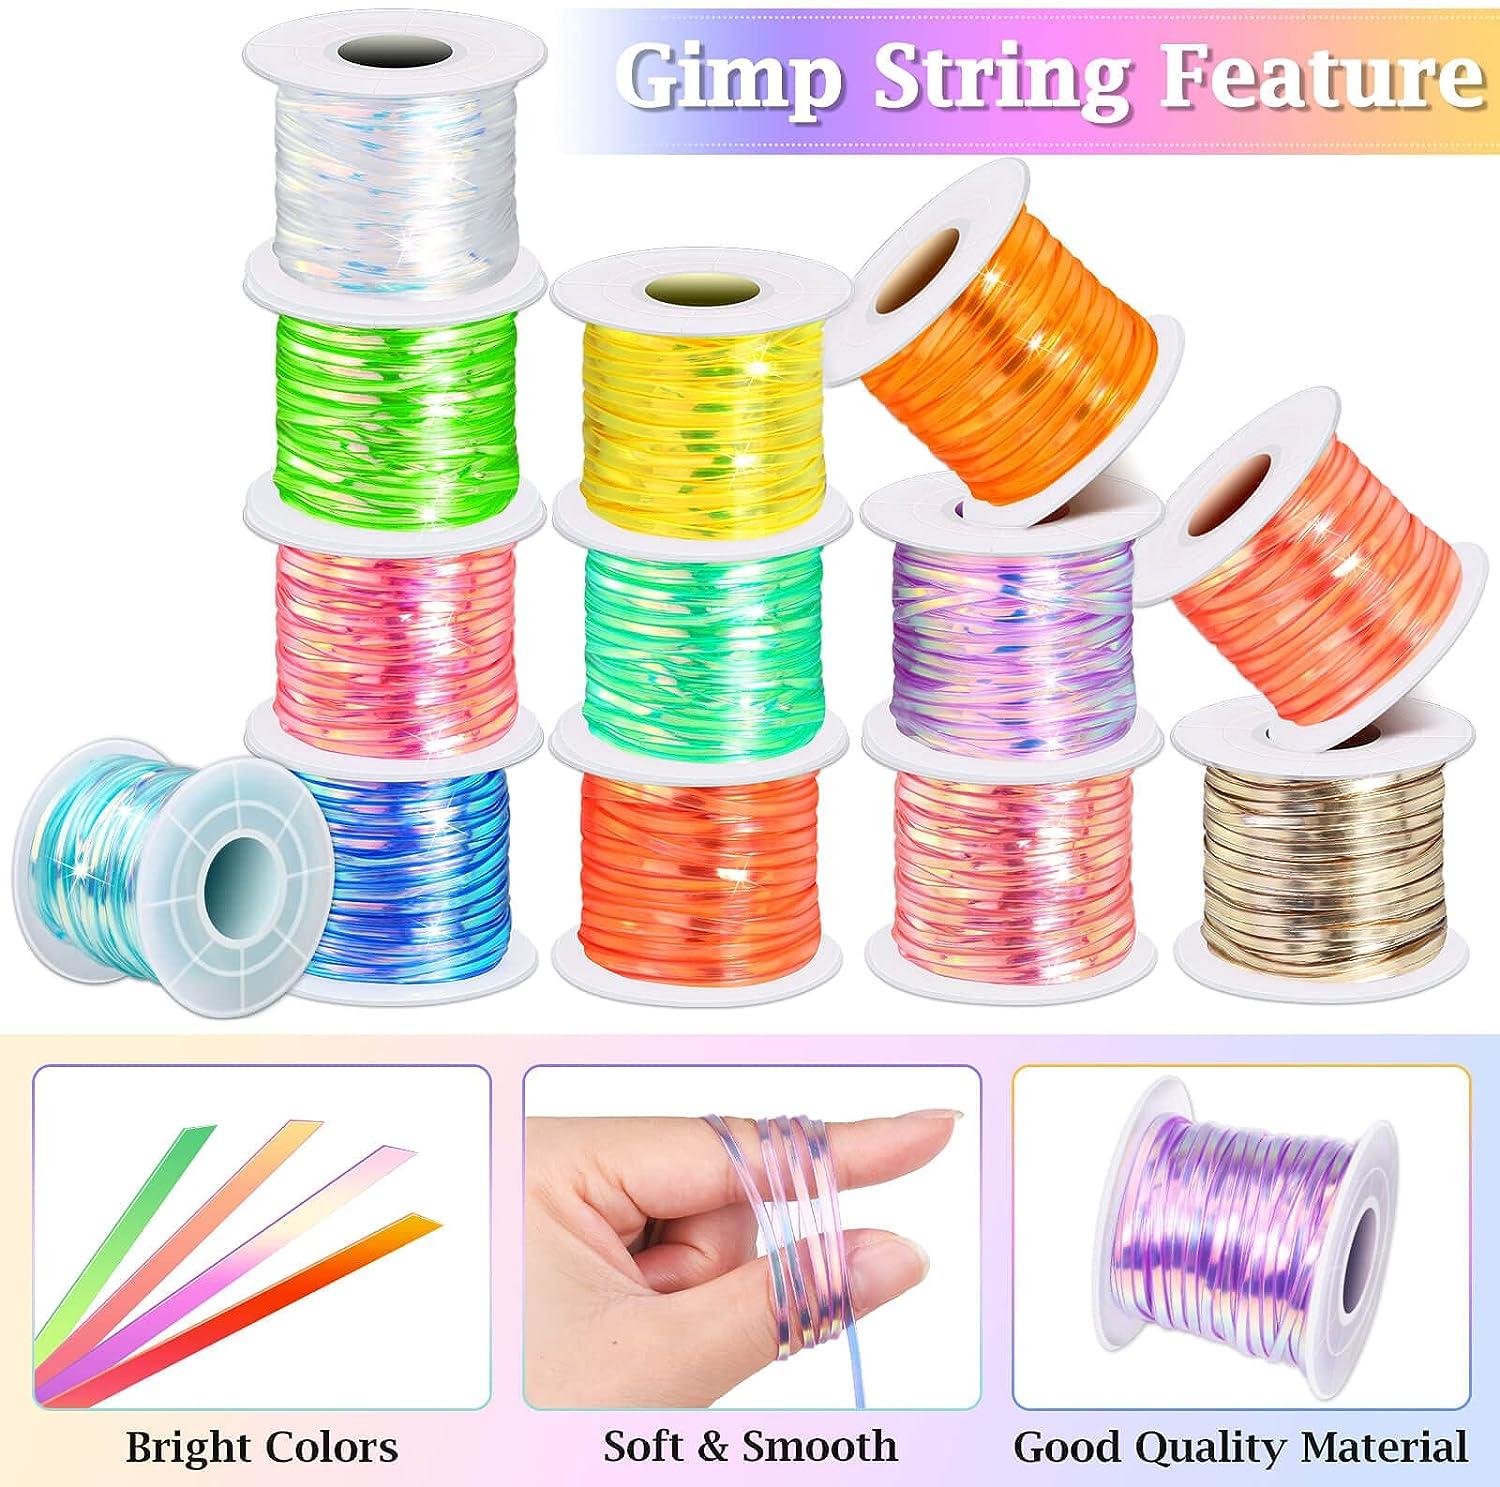 Lanyard String Kit, Cridoz 15 Rolls Gimp String Plastic Lacing Cord with  50pcs Snap Clip Hooks, Keyrings and Lobster Clasps for Boondoggle Crafts,  Bracelets and Lanyard Weaving (Laser Colors)